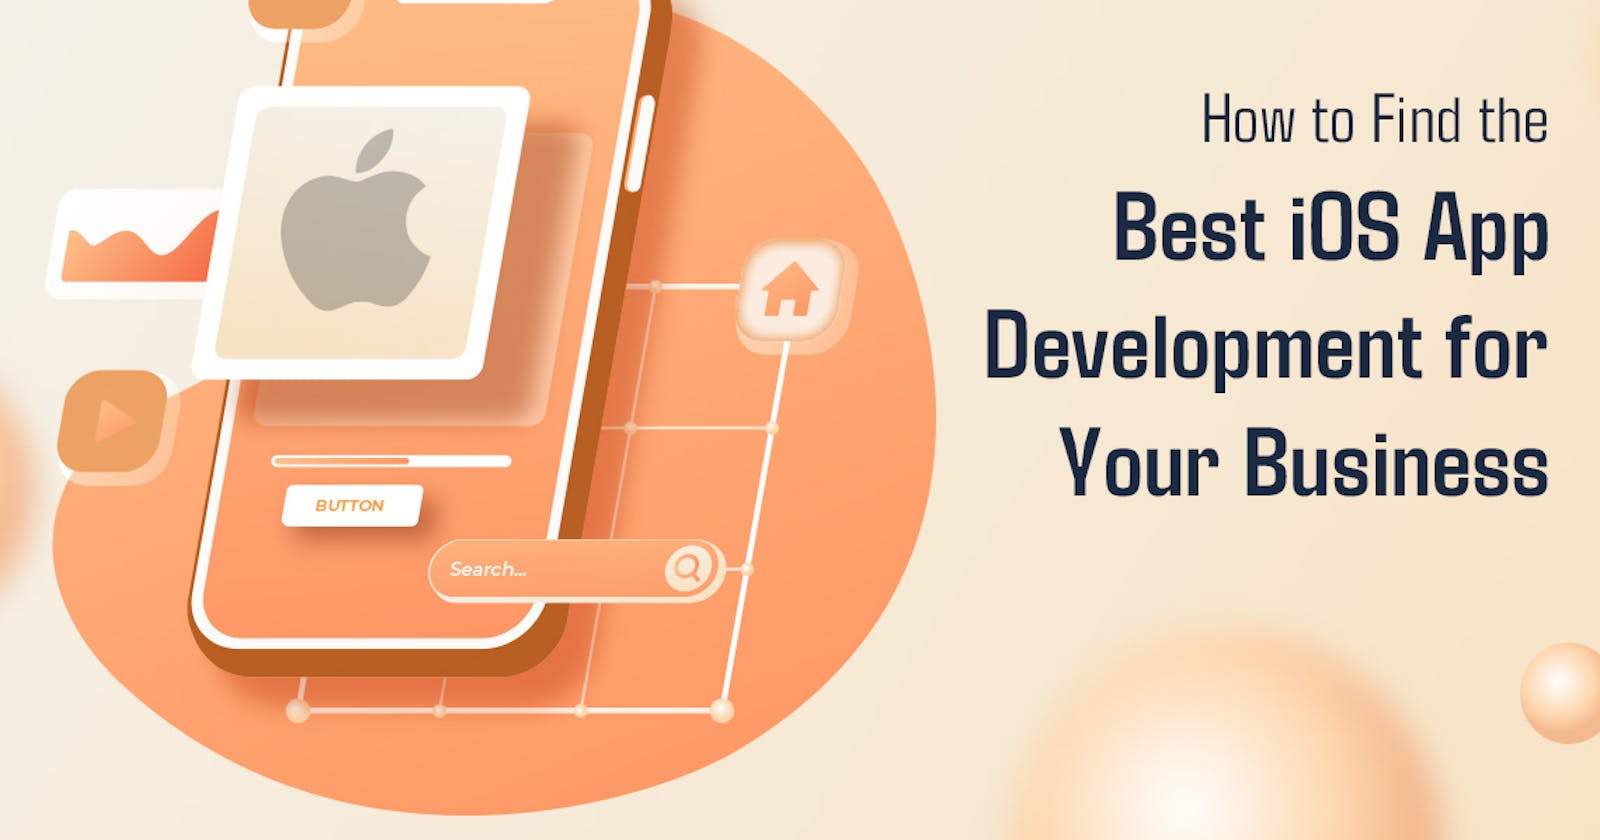 How to Find the Best iOS App Development for Your Business